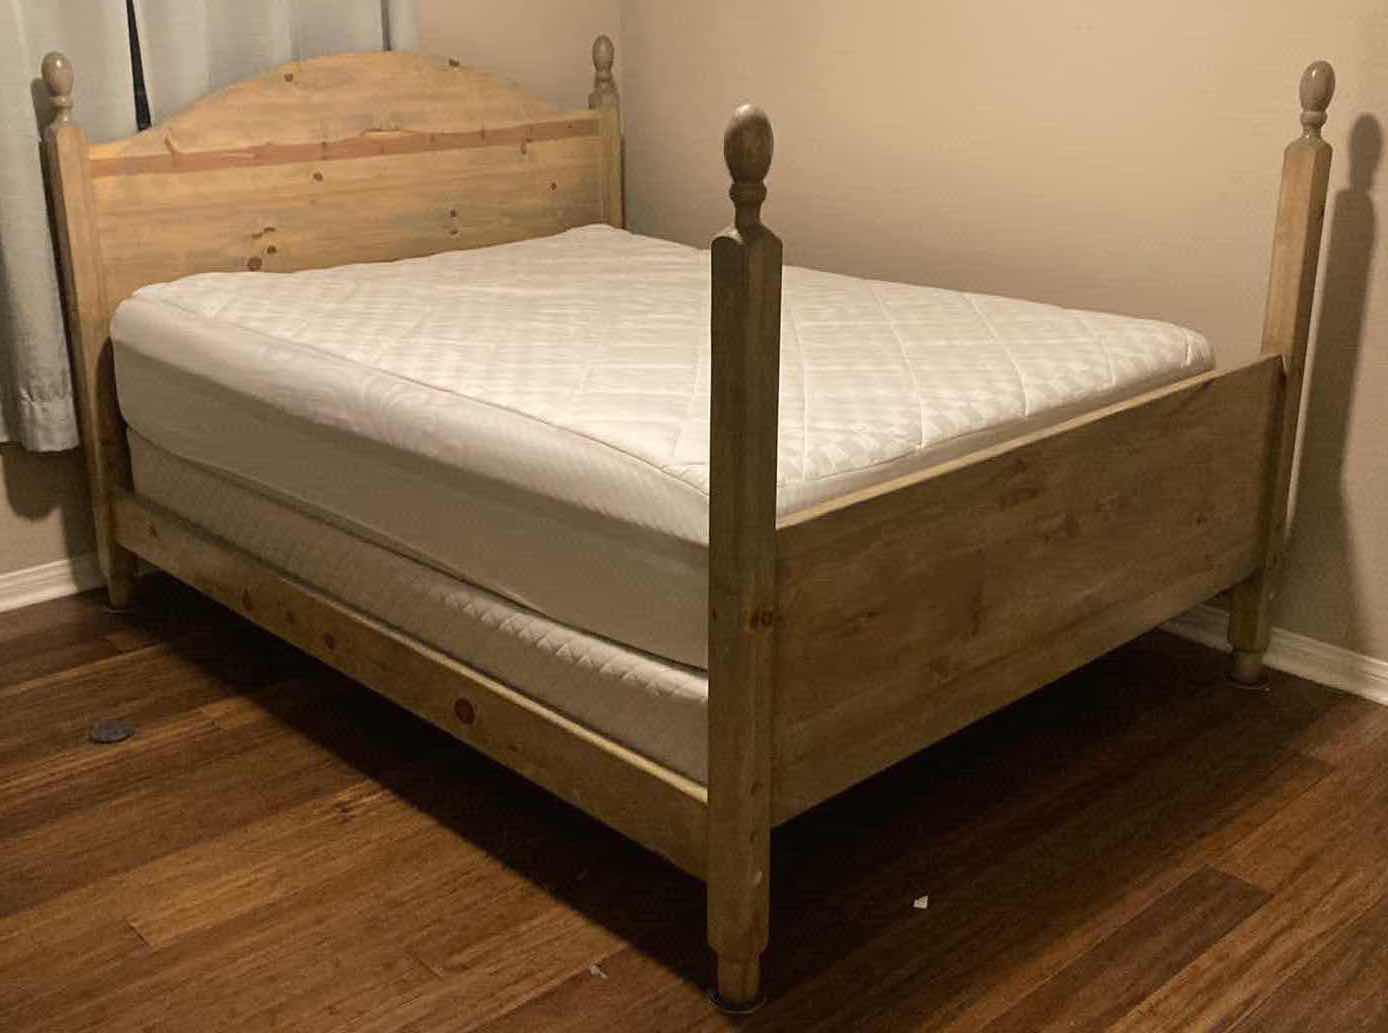 Photo 1 of PINE TWO TONE WOOD FULL SIZE BED FRAME W SEALY POSTURE-PEDIC HYBRID MATTRESS & BOX SPRING